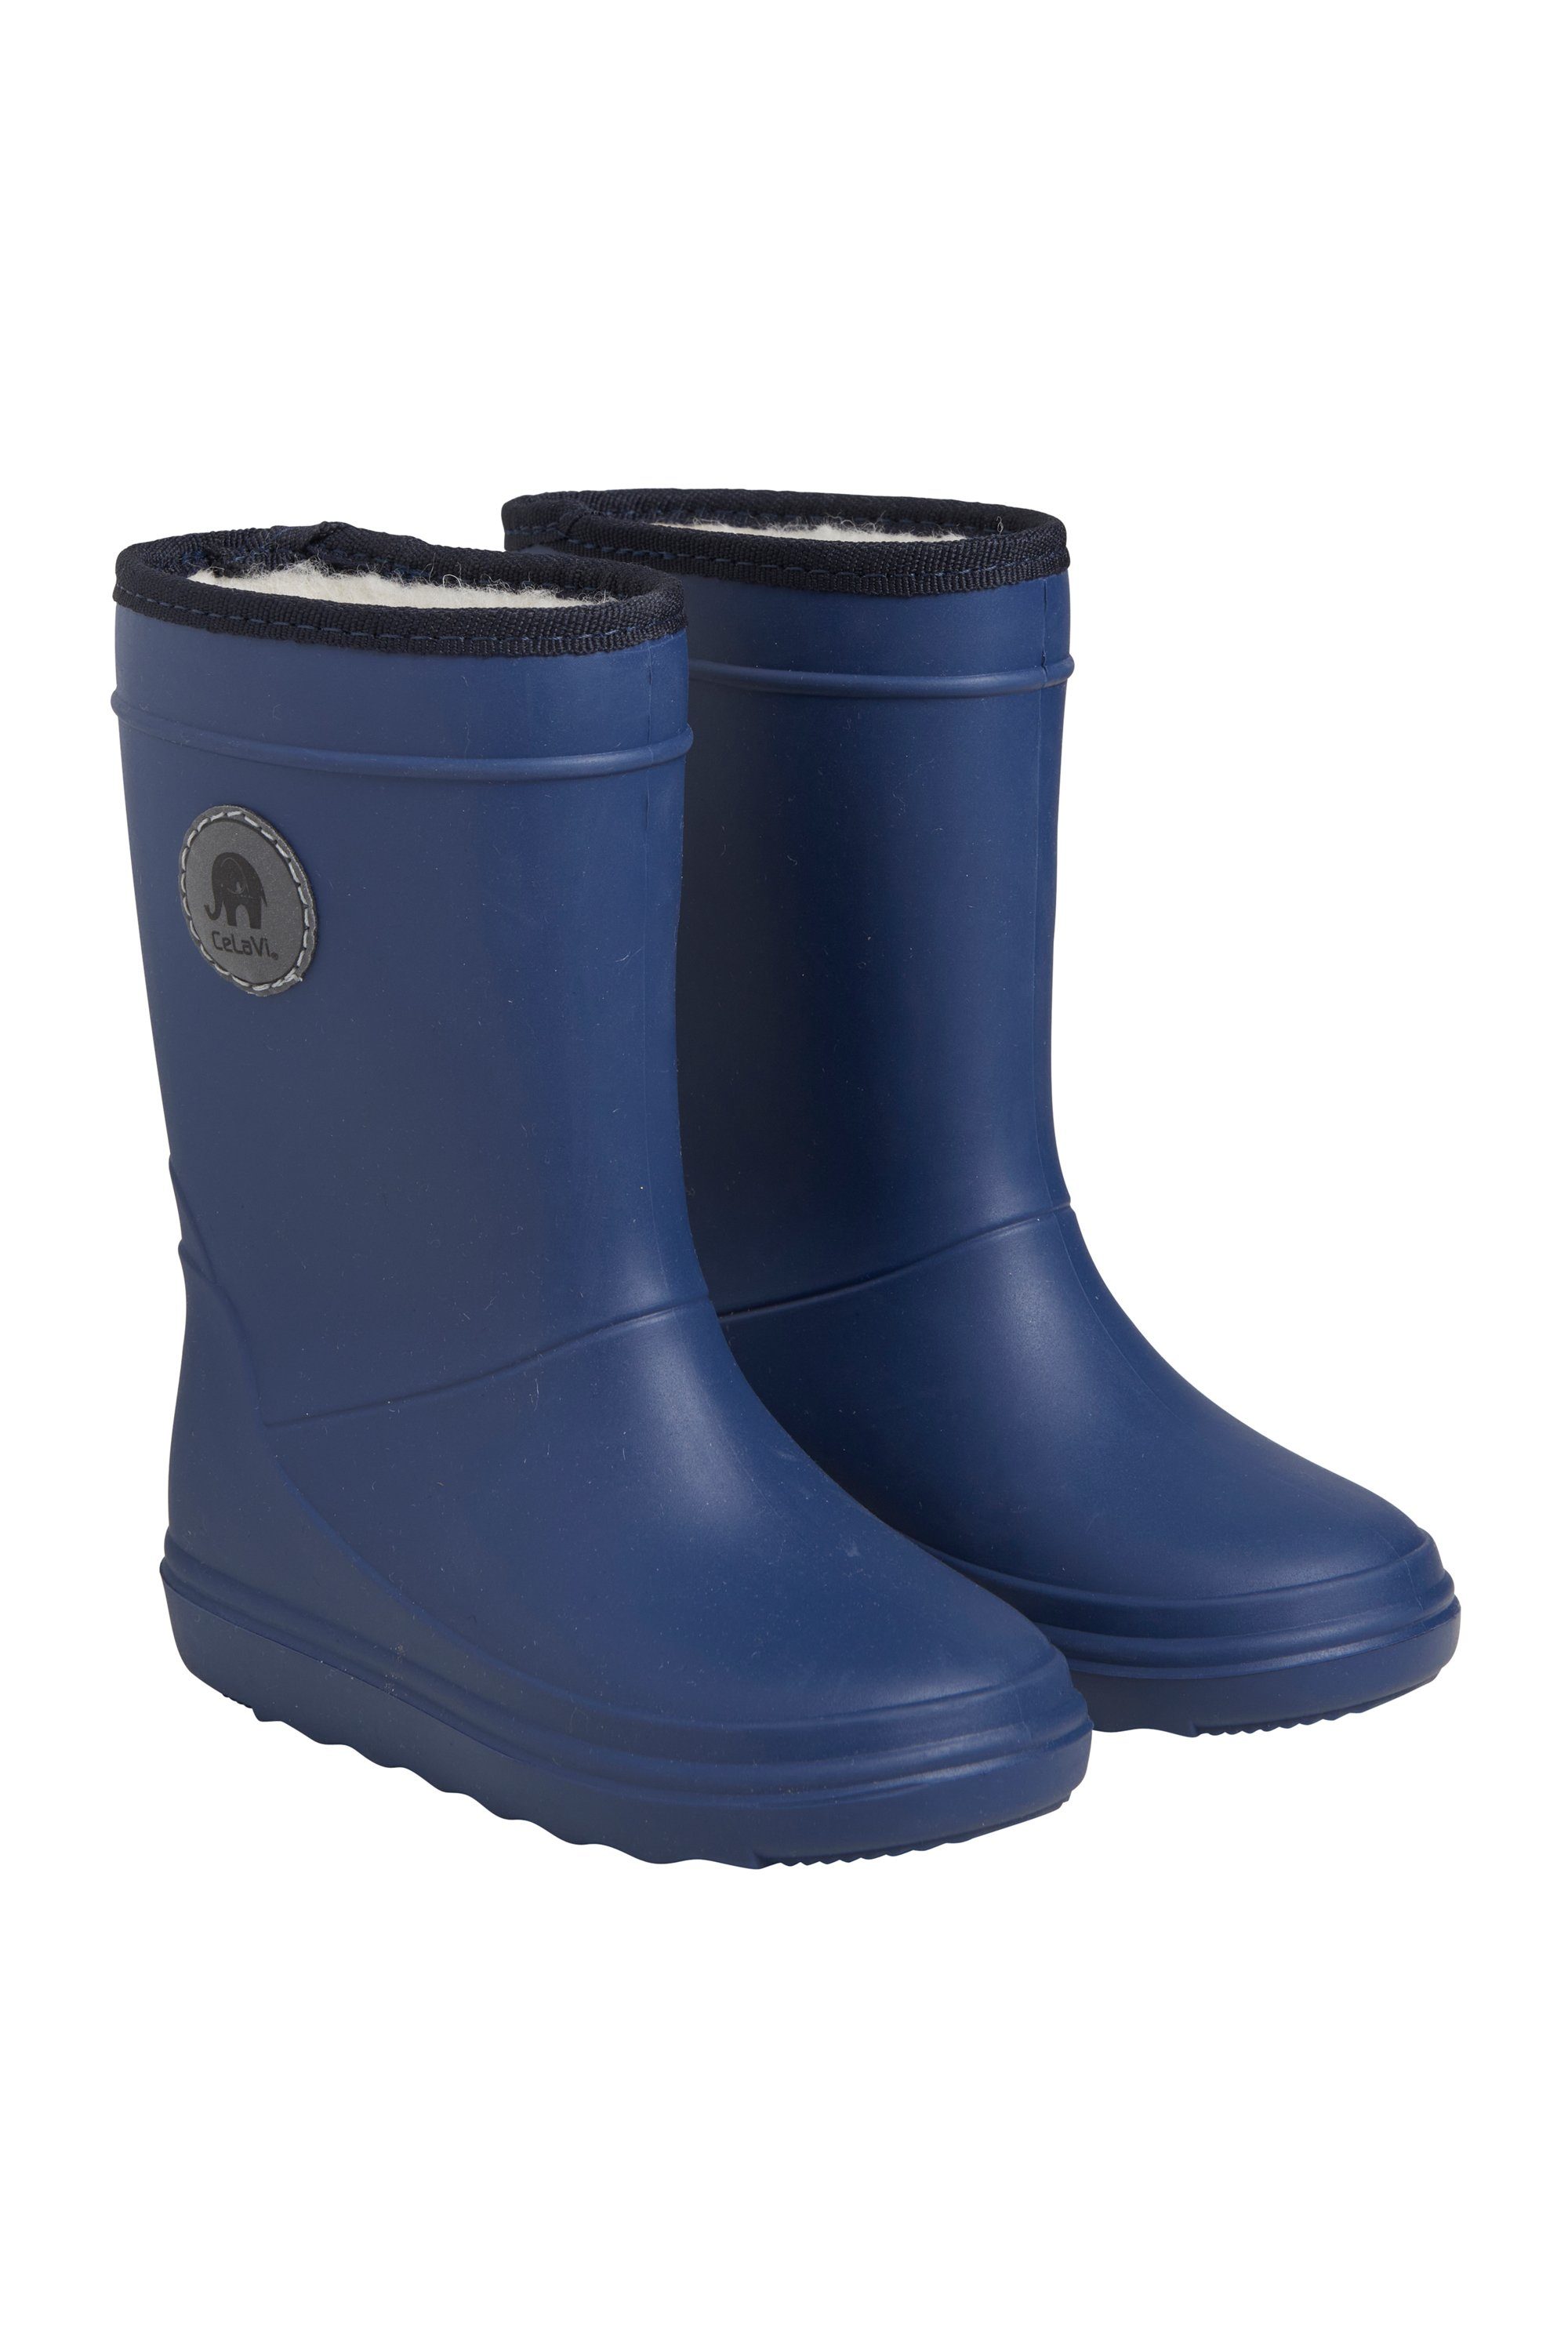 CeLaVi CEThermo Boots - 6274 Winterboots